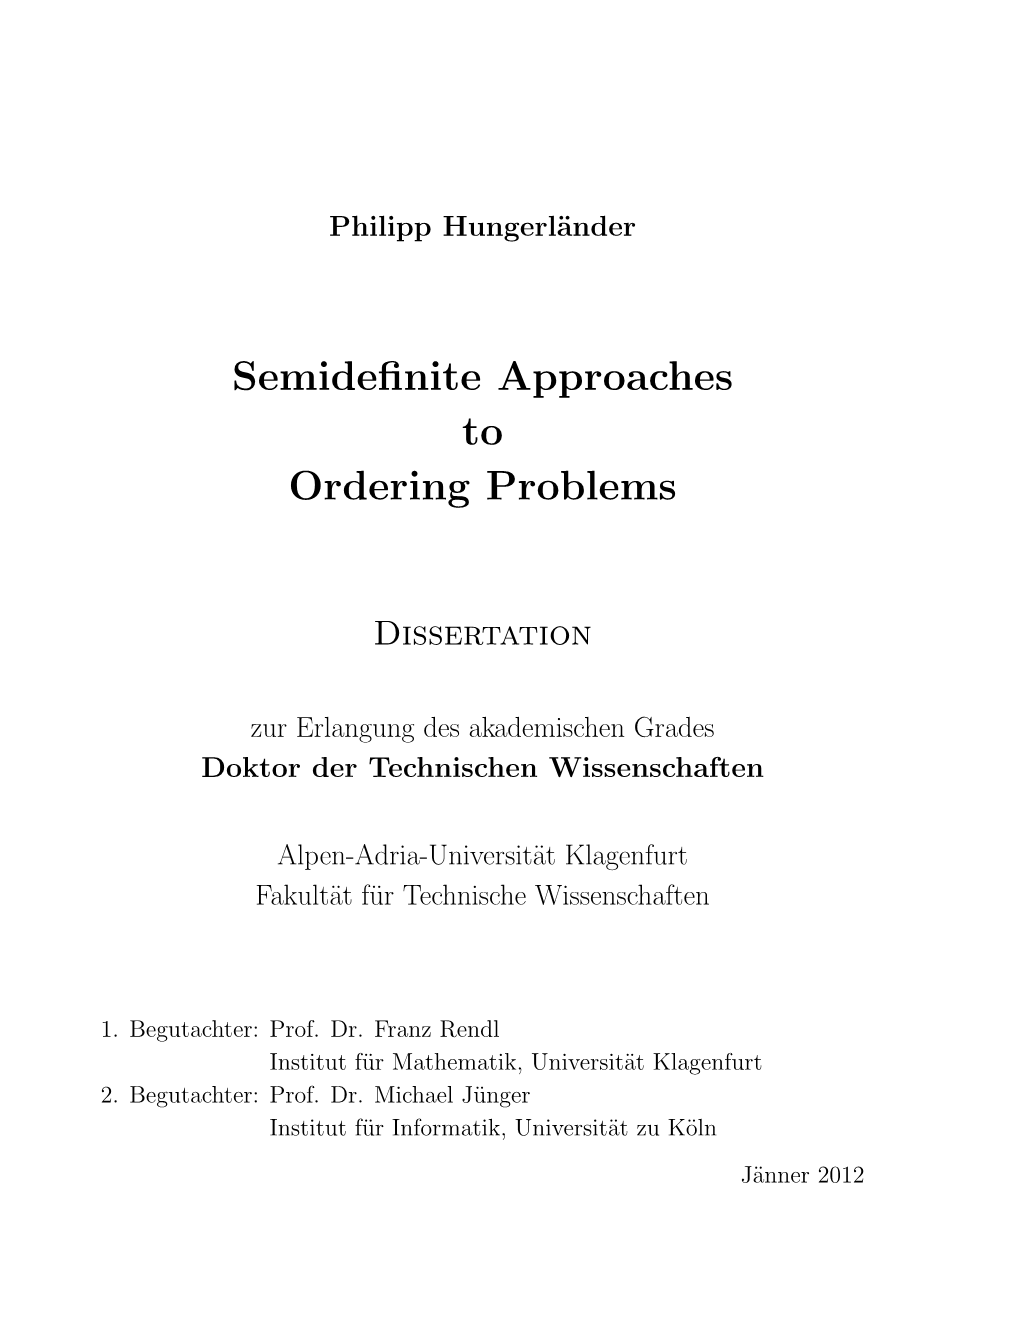 Semidefinite Approaches to Ordering Problems